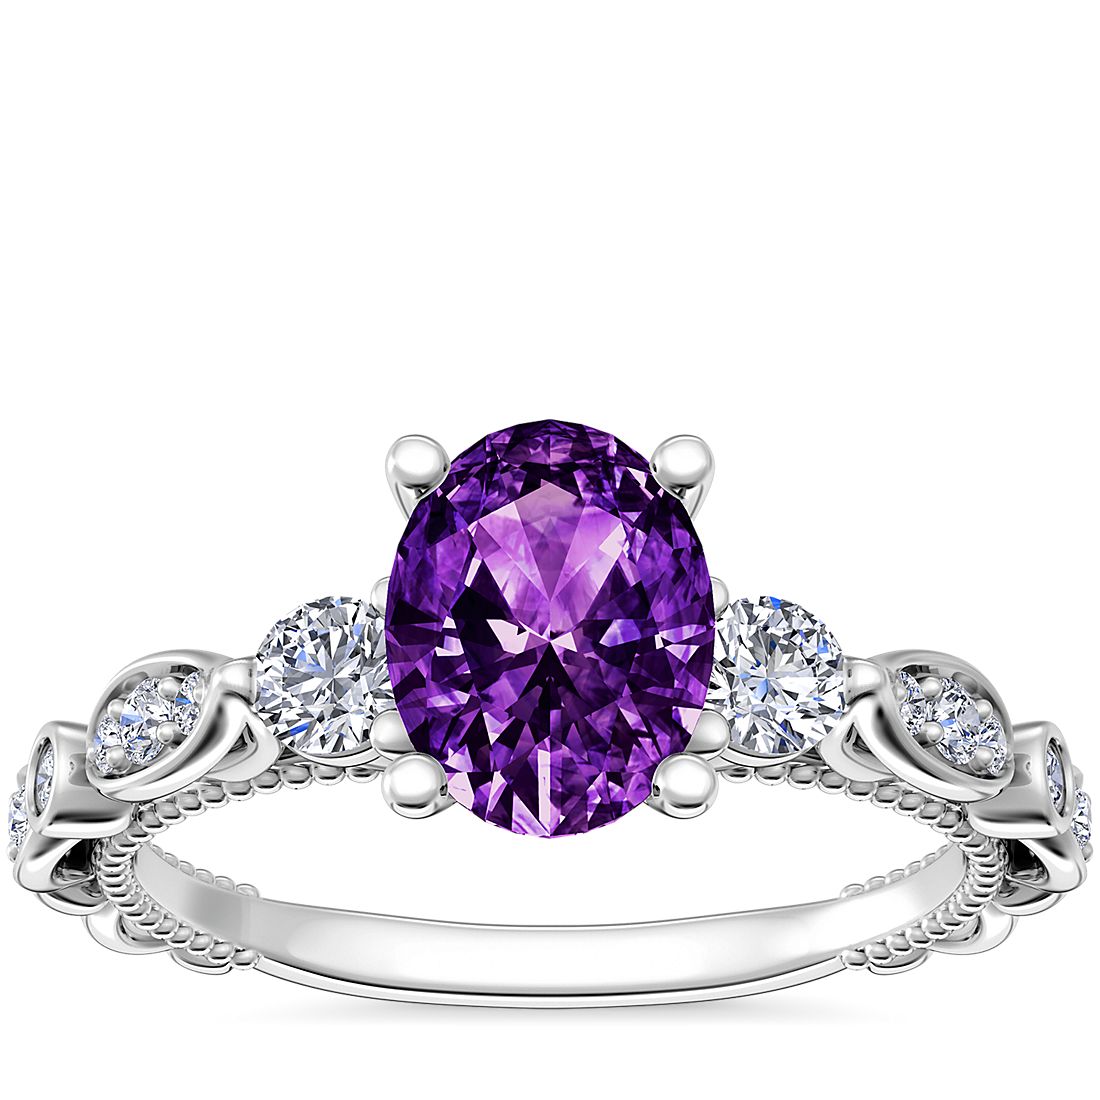 Floral Ellipse Diamond Cathedral Engagement Ring with Oval Amethyst in 14k White Gold (8x6mm)